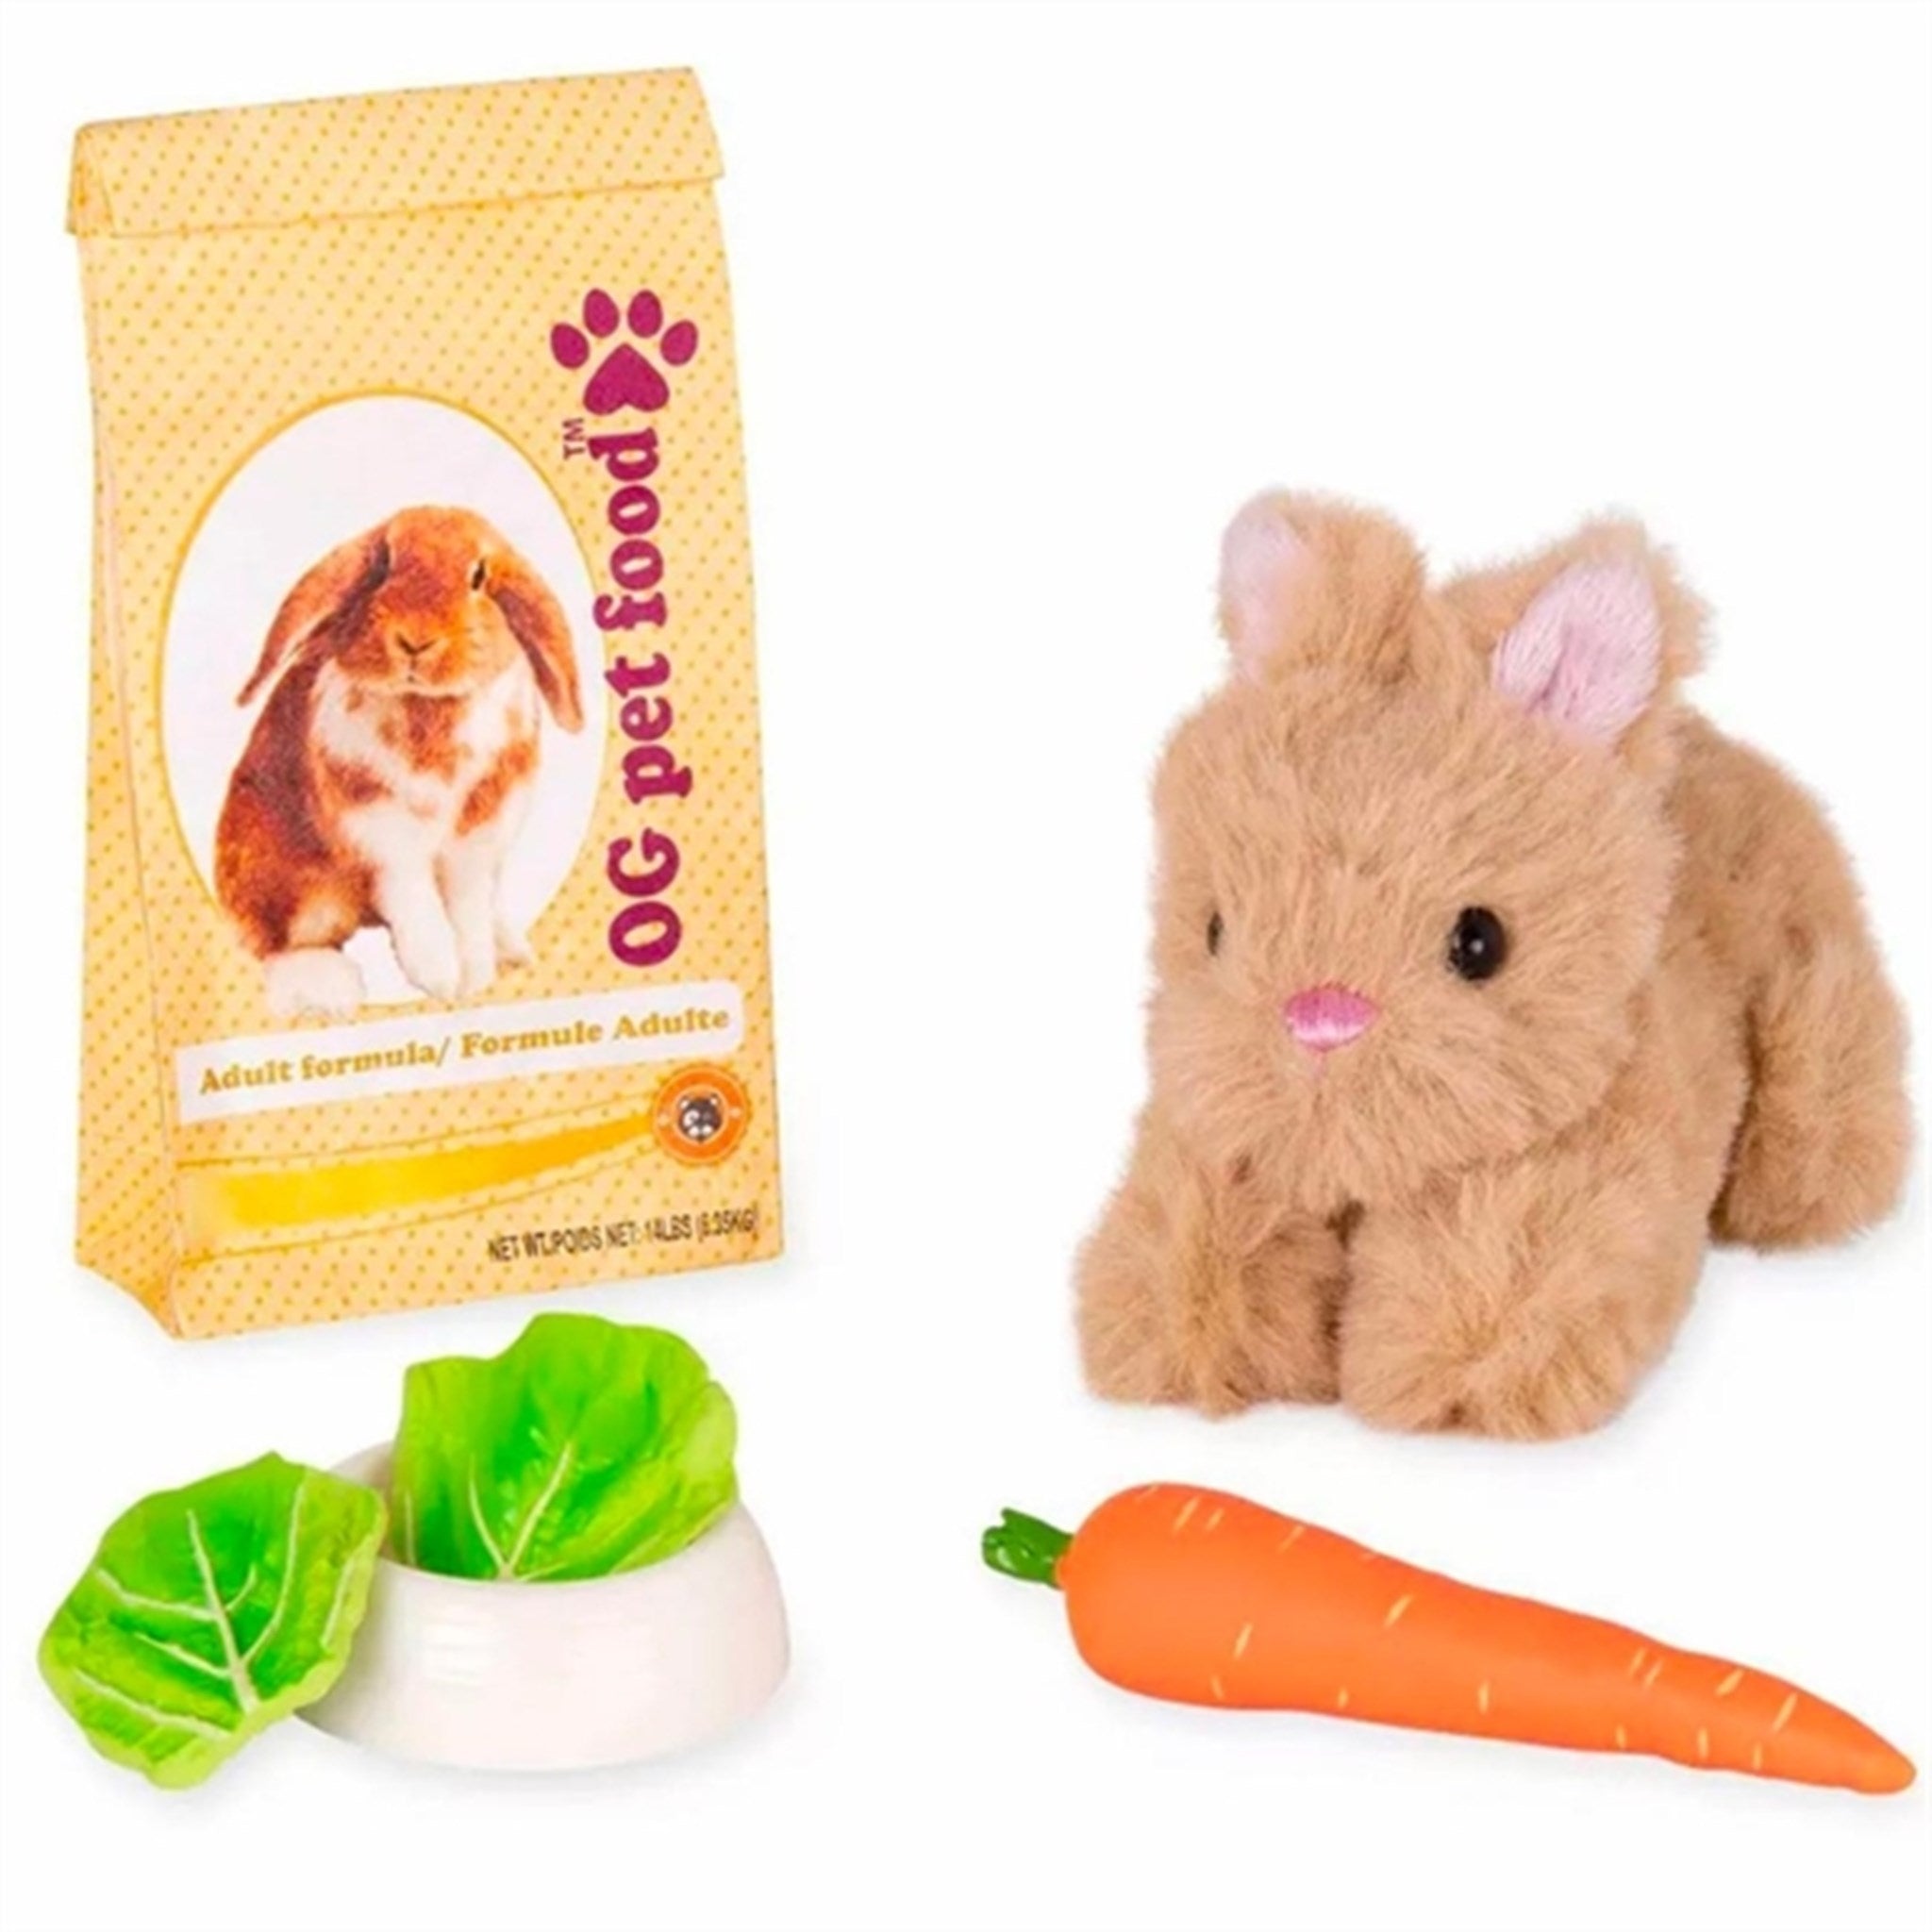 Our Generation Doll Accessories - Pet Bunny